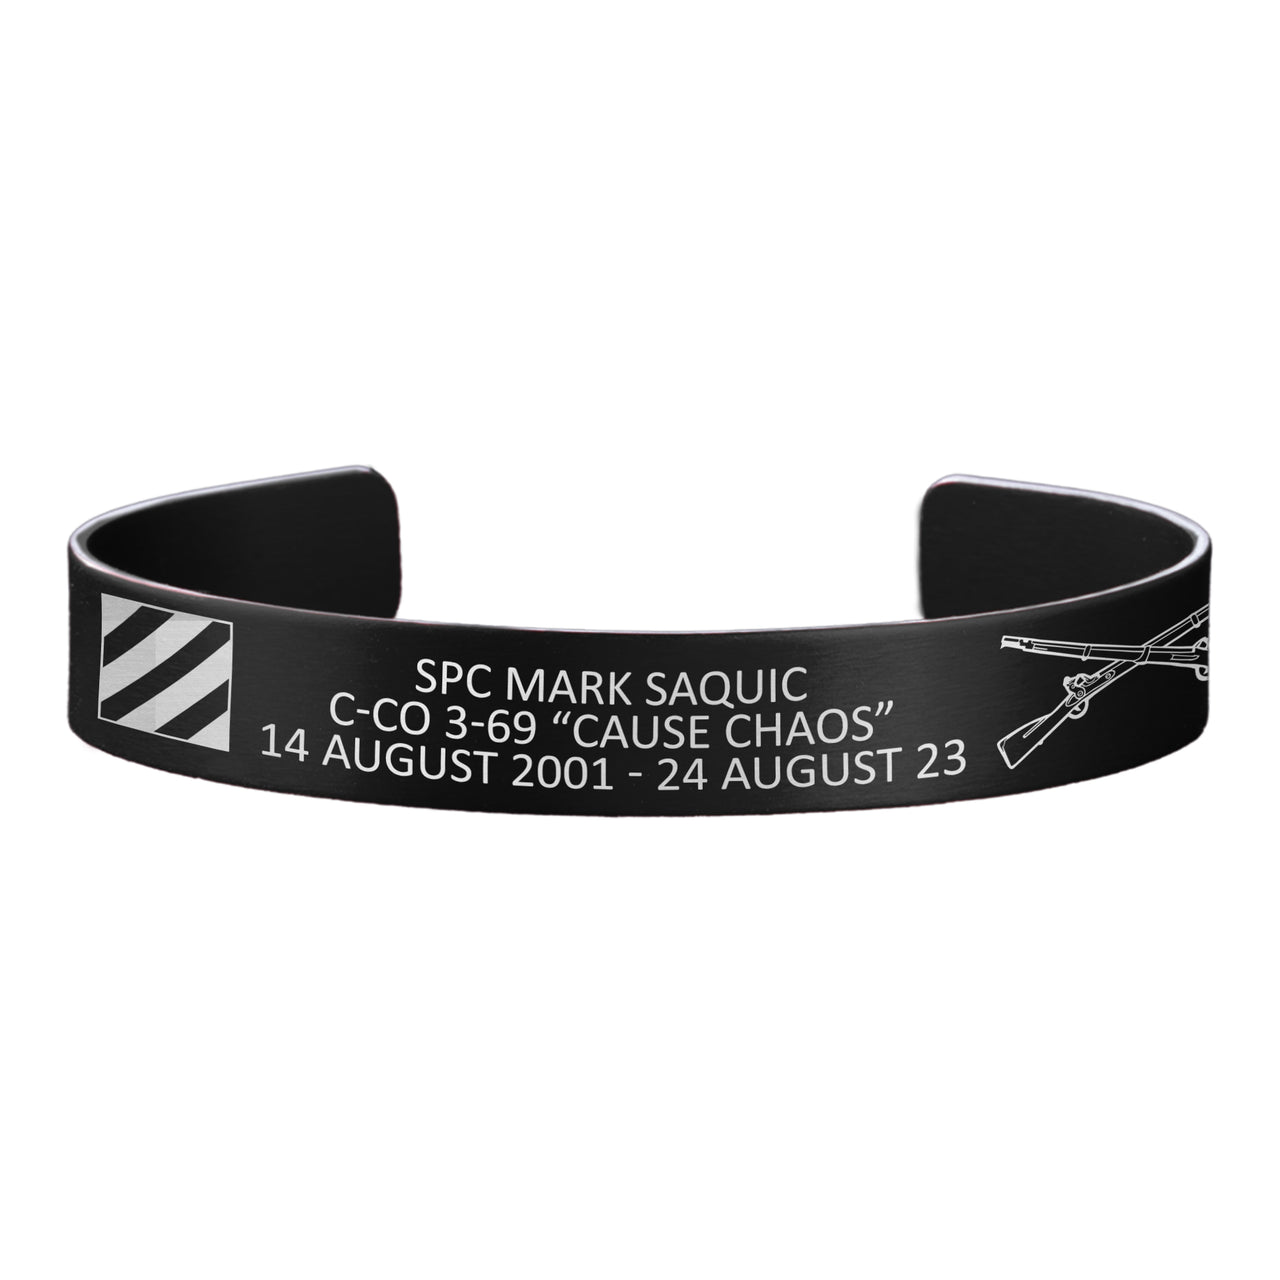 SPC Mark Saquic Memorial Band – Hosted by the Saquic Family